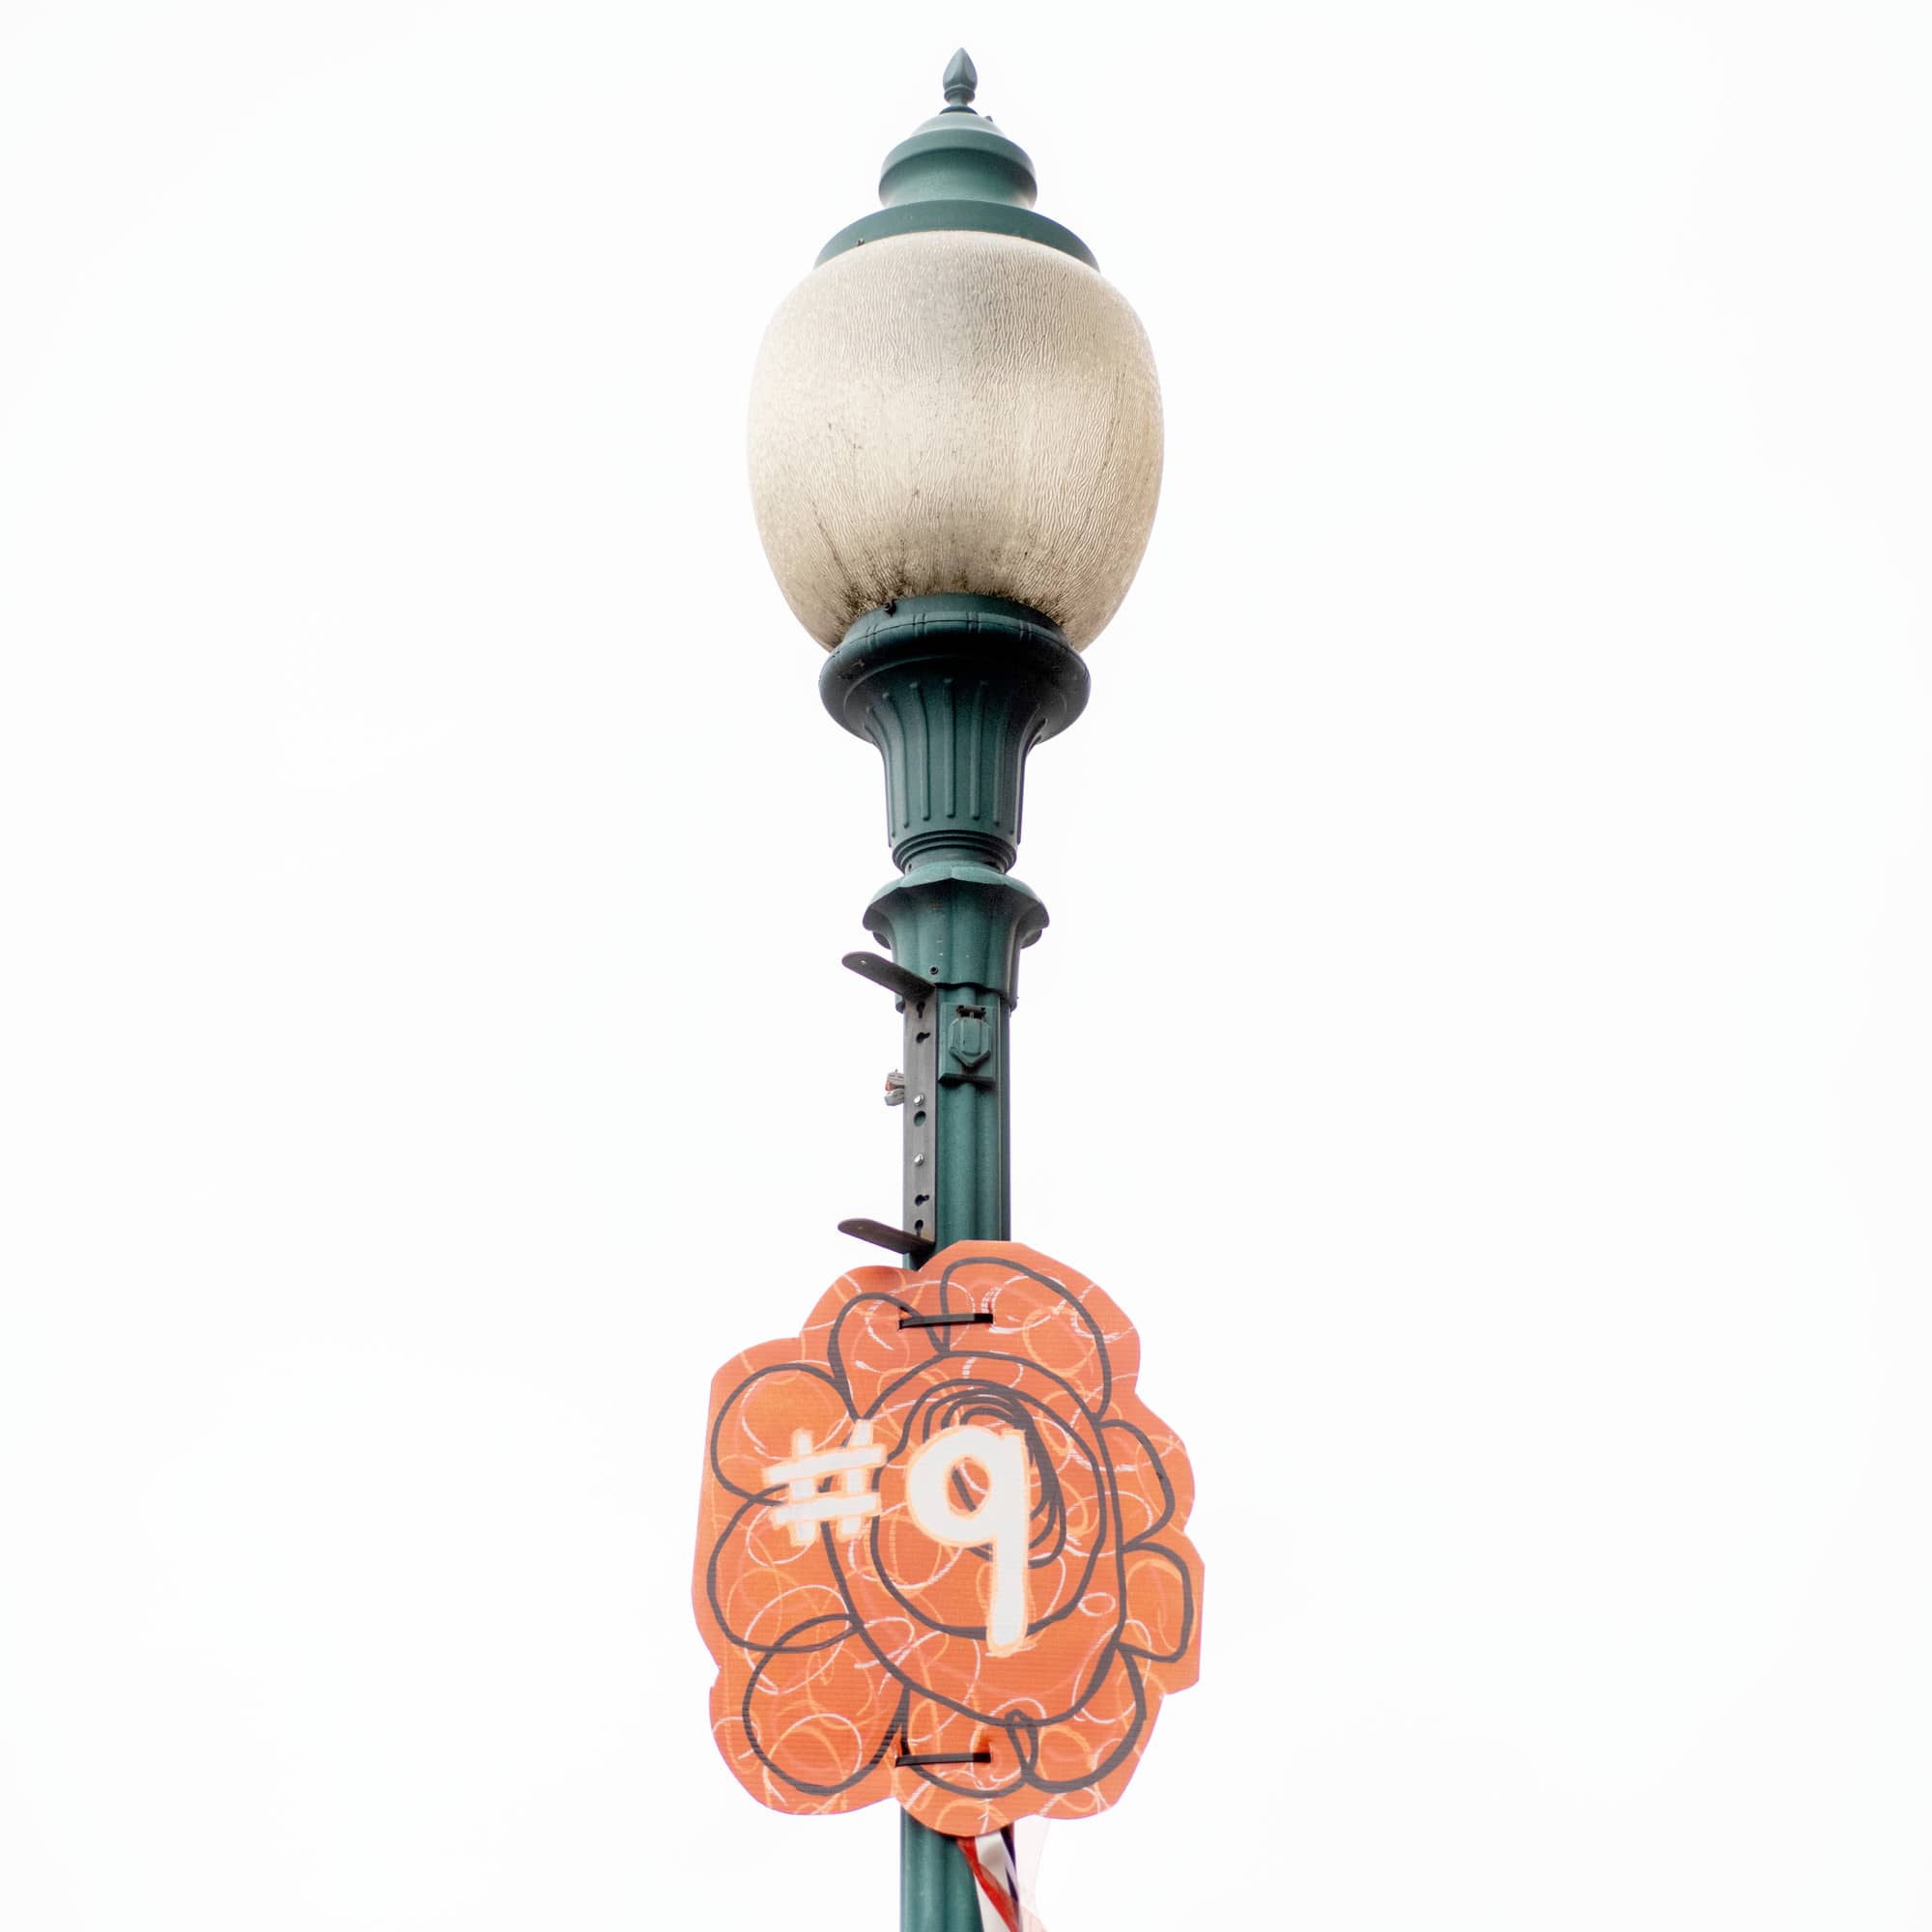 Flowers showcasing Joe Burrow's jersey number are on display along lamp post along Court Street in Athens. The local community arts center Passion Works Studio used repurposed materials to make the decorum.